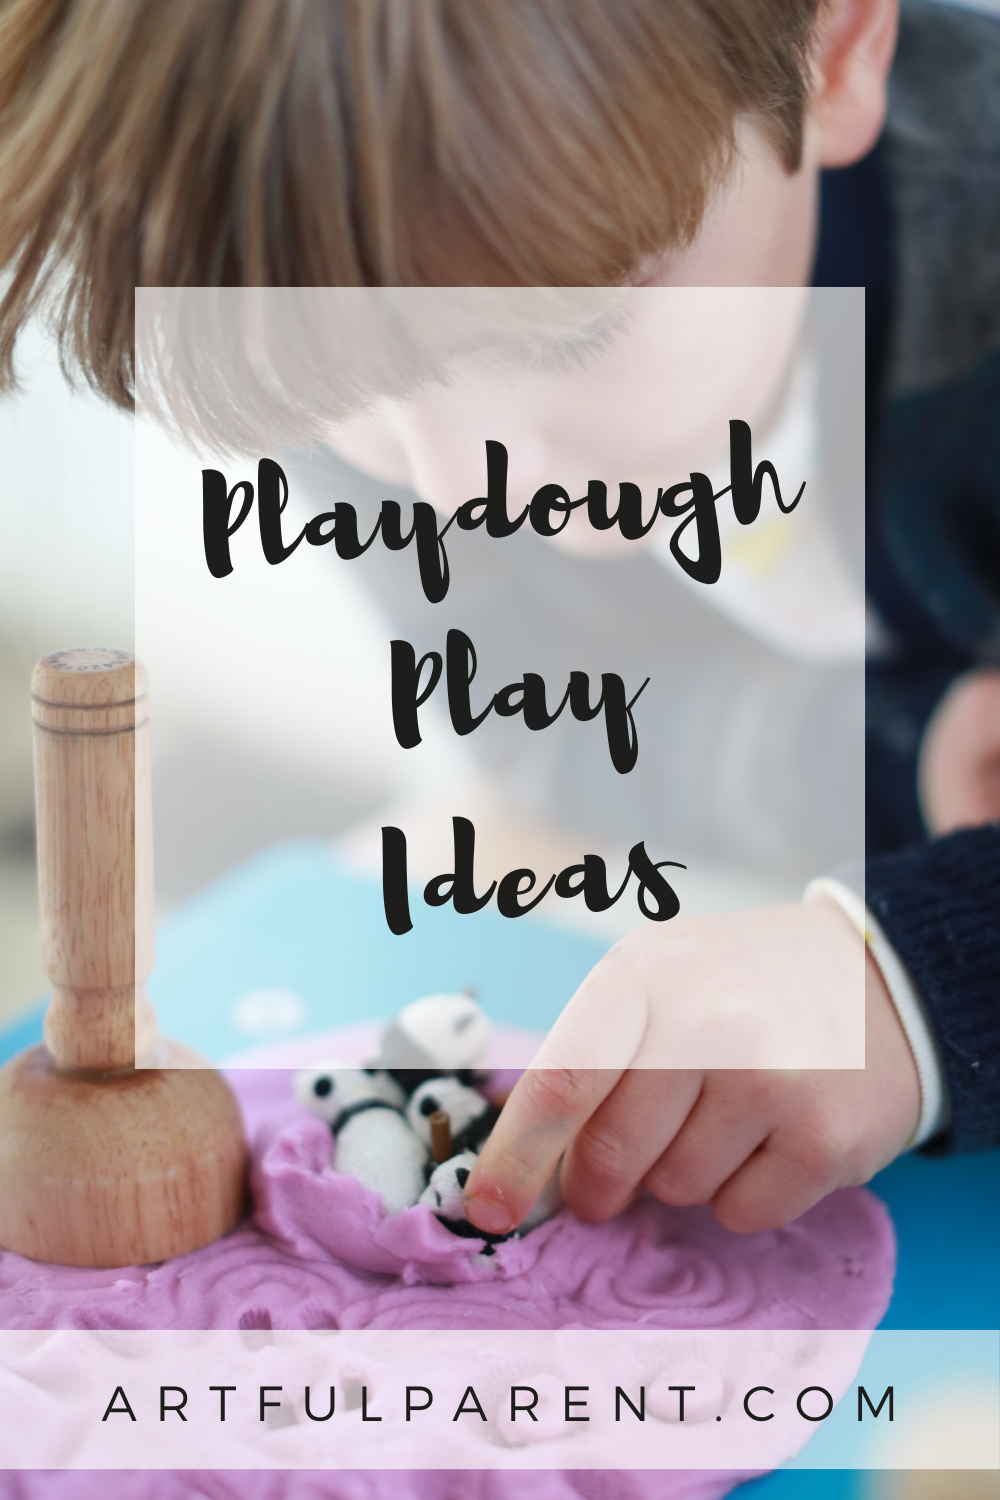 Our Favorite Playdough Play Ideas for Kids